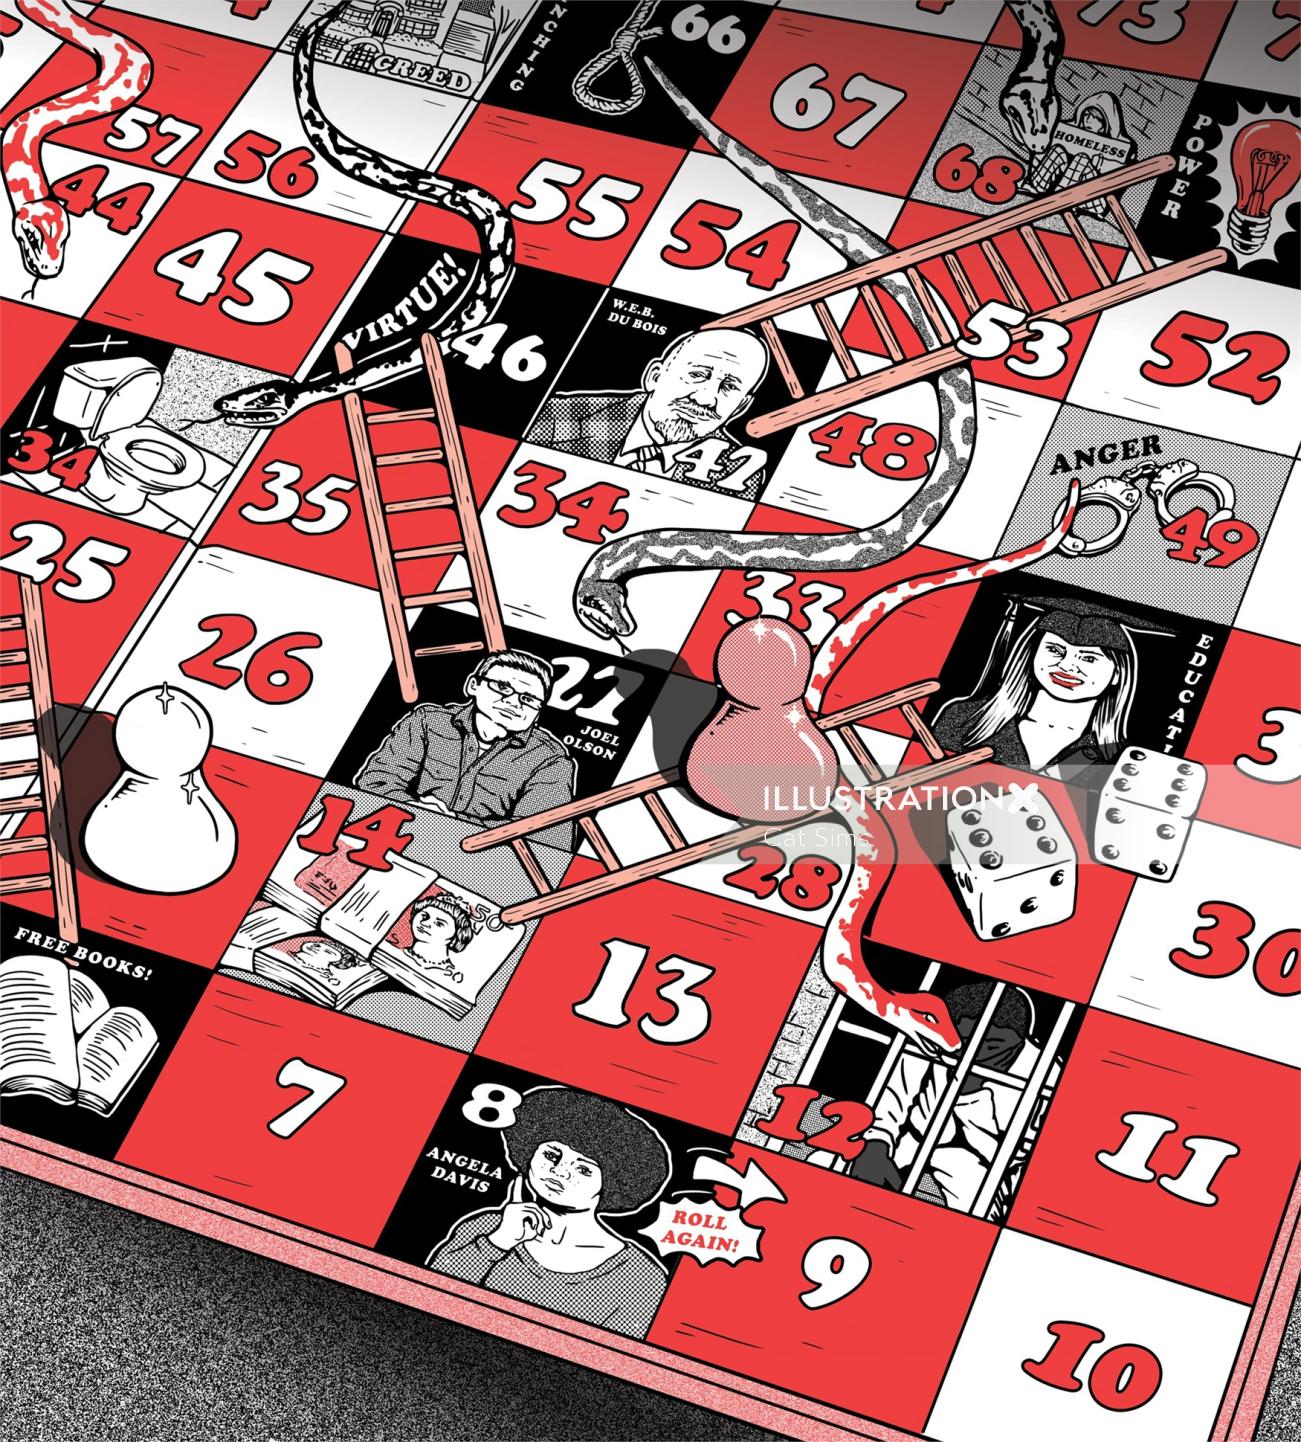 Graphic Snakes and ladders
